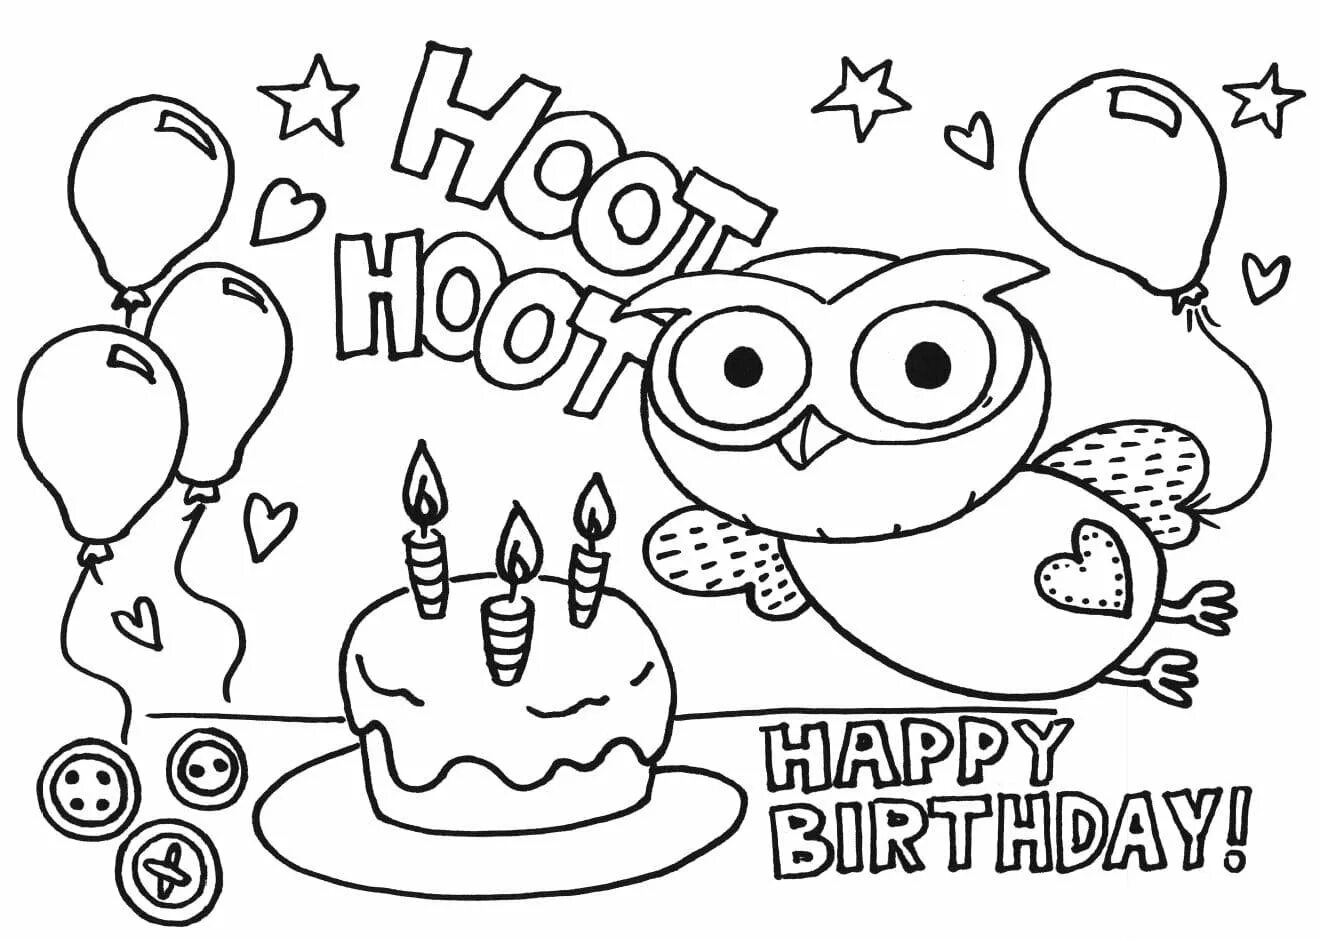 Coloring page dazzling little sister for birthday